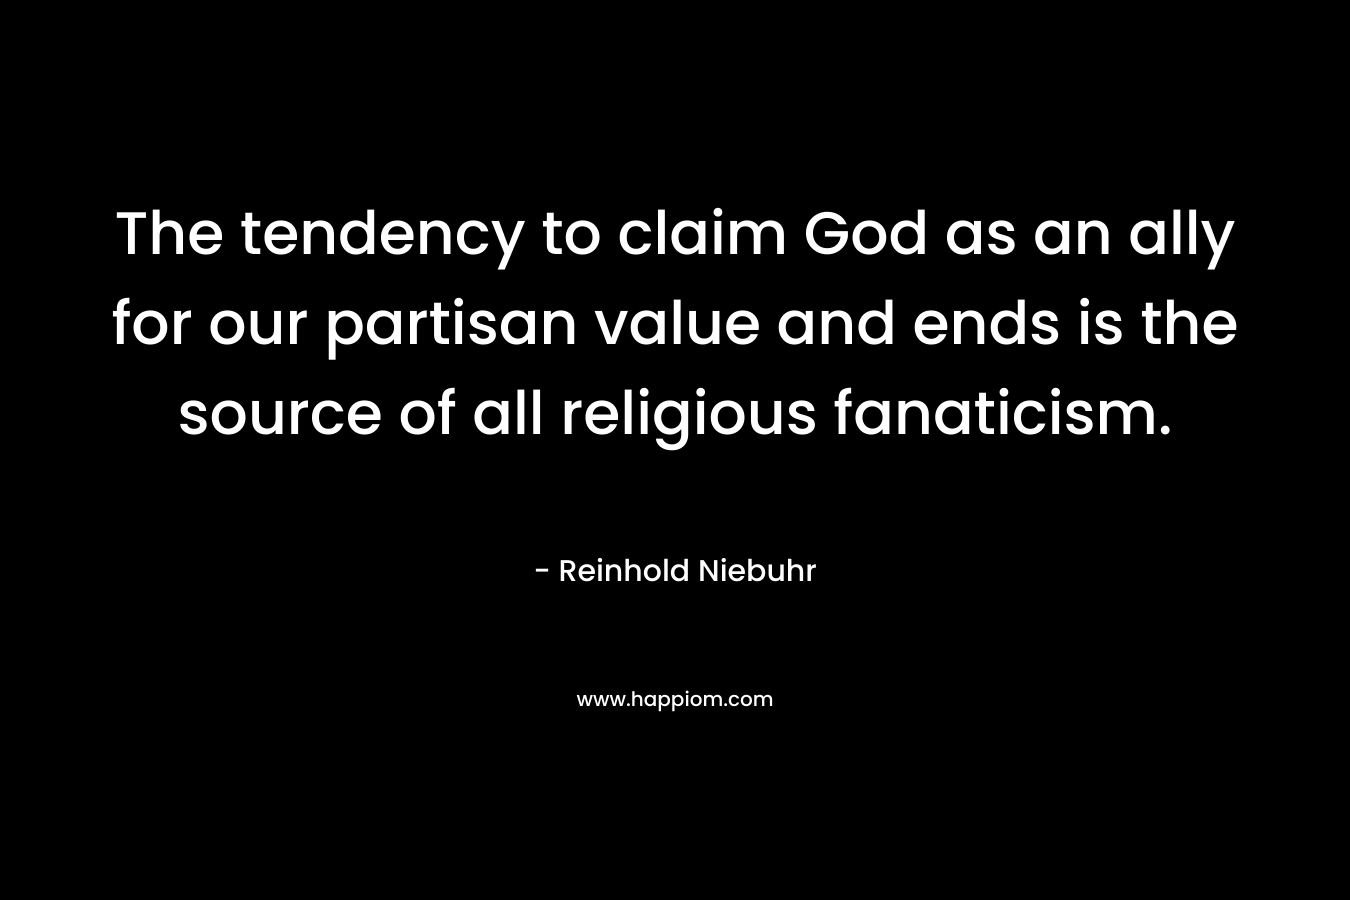 The tendency to claim God as an ally for our partisan value and ends is the source of all religious fanaticism. 